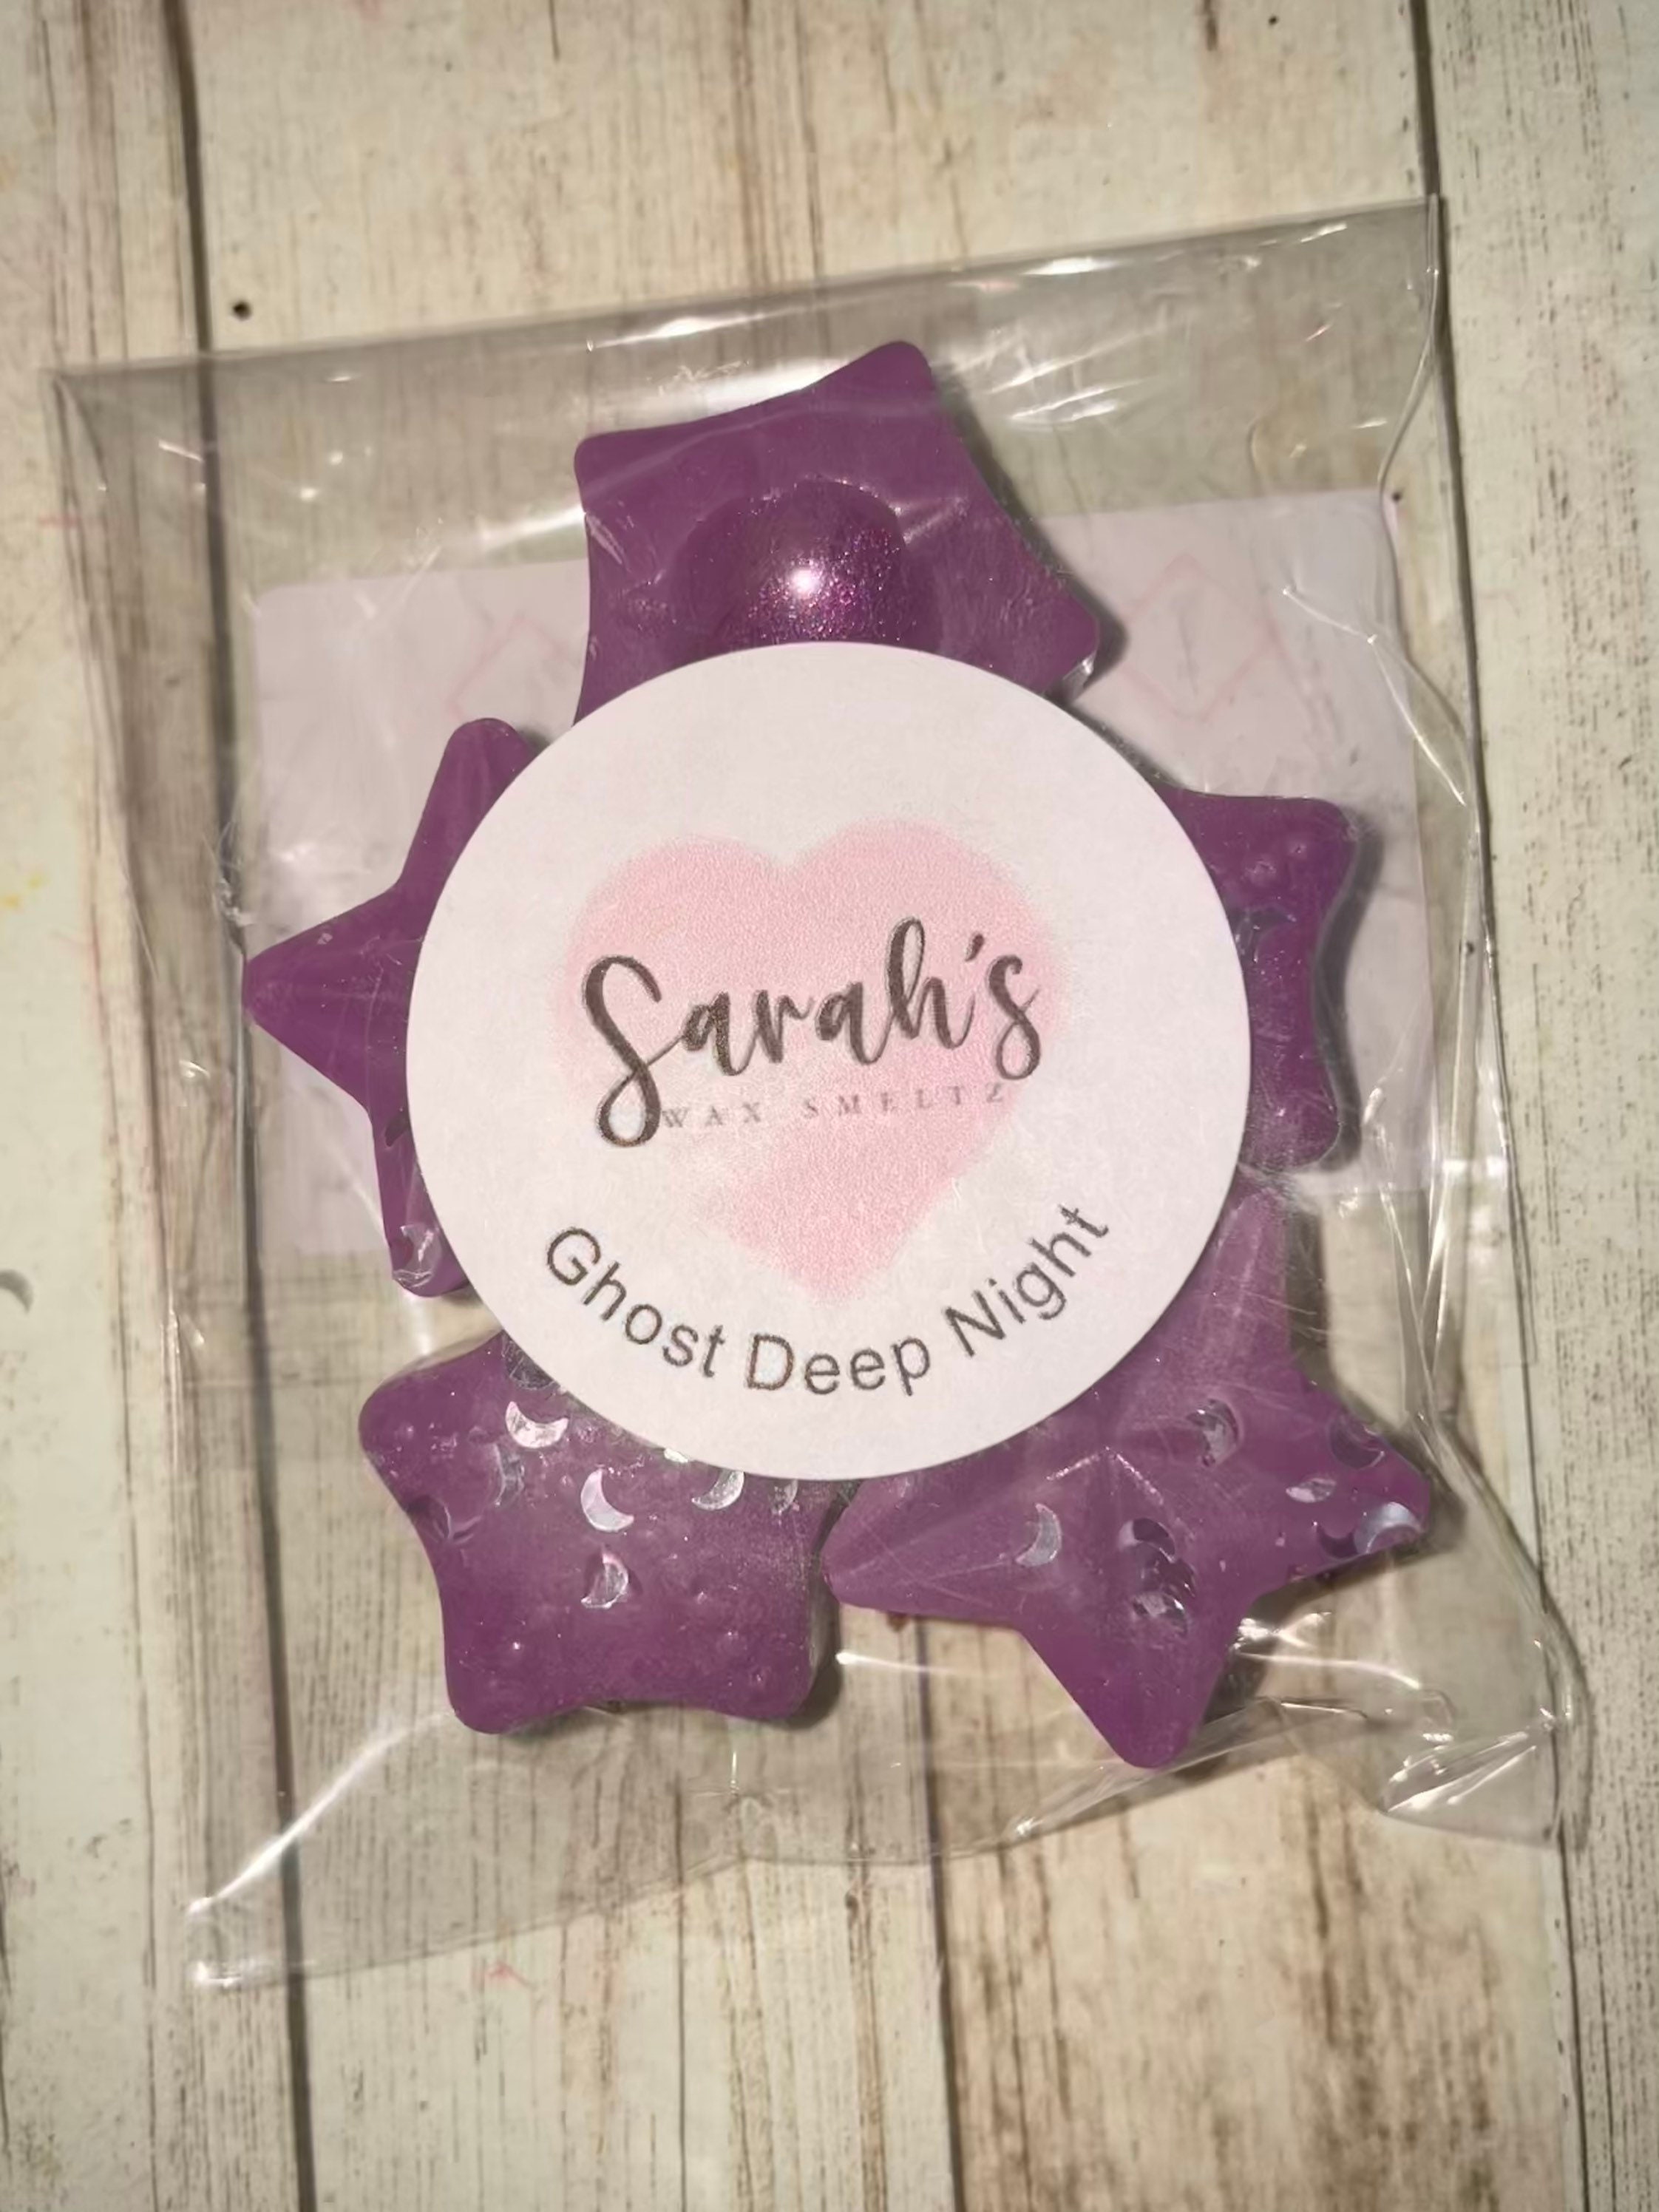 Ghostly Deep Night Perfume Highly Scented Wax Melts / Snap Bars. Plant  Based Wax. Hand Poured and Designed, Strong Smell, FREE POSTAGE 